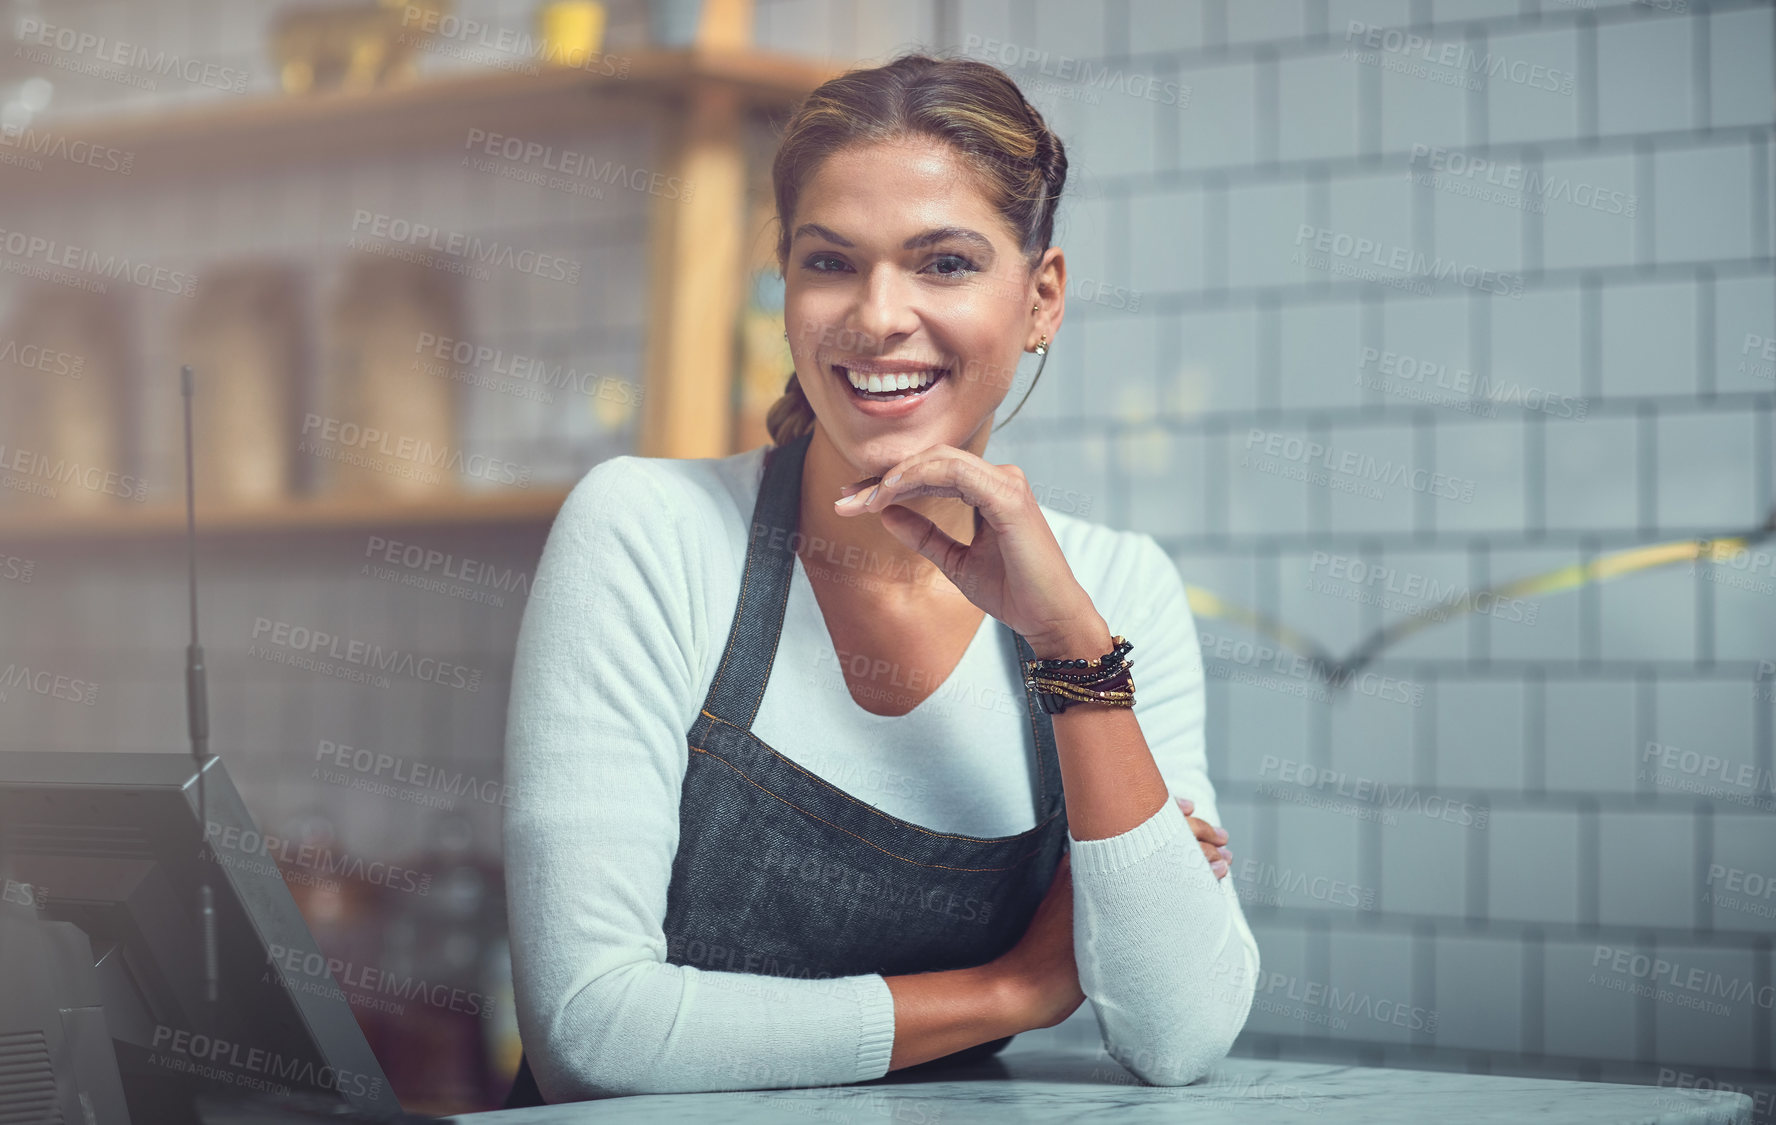 Buy stock photo Portrait of a young woman working behind the counter of her store